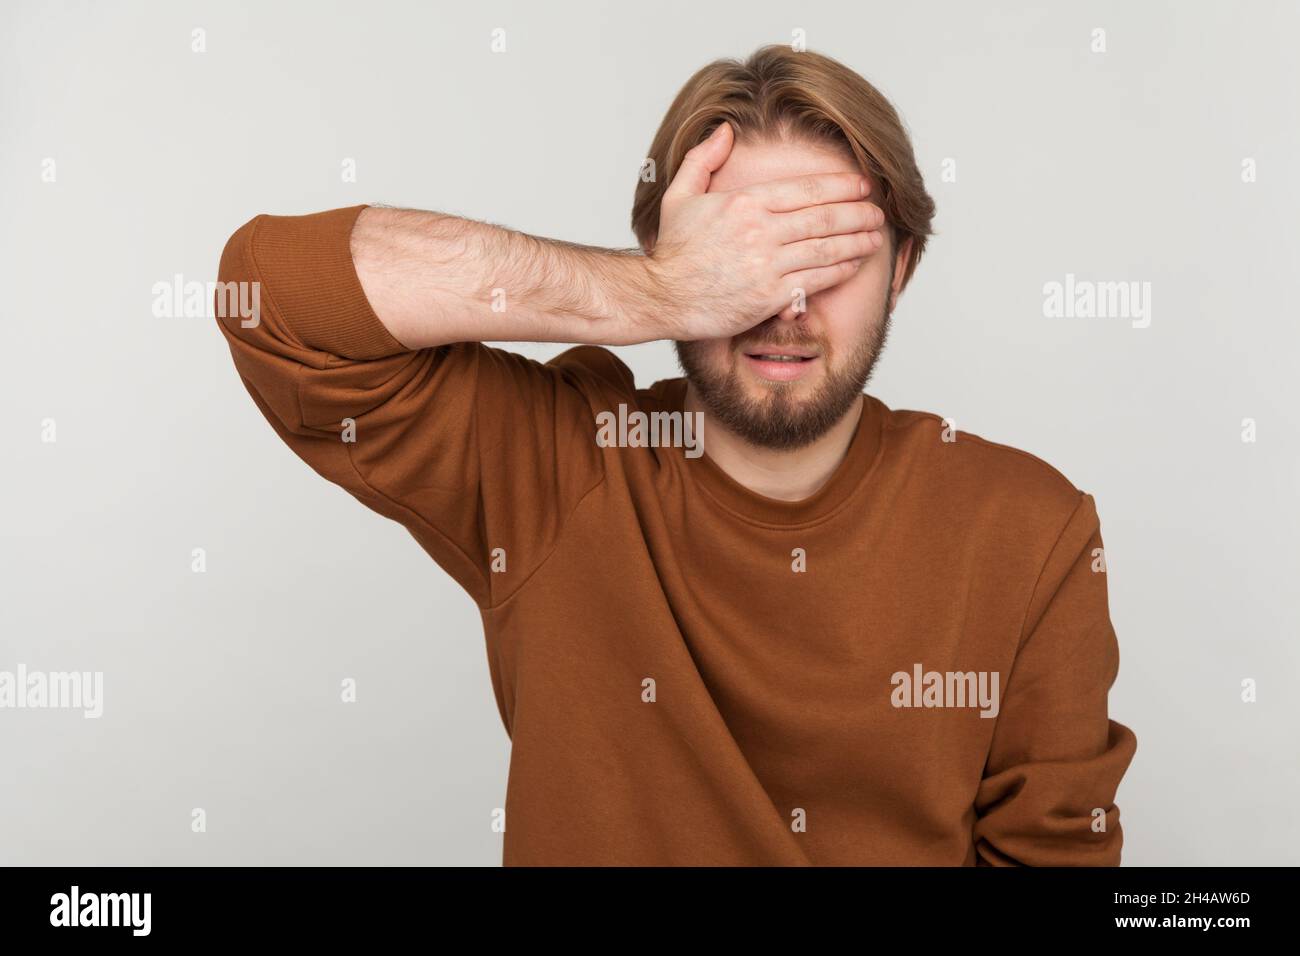 Portrait of man with beard wearing sweatshirt, closing eyes with hand, dont want to see that, ignoring problems, hiding from stressful situations. Indoor studio shot isolated on gray background. Stock Photo